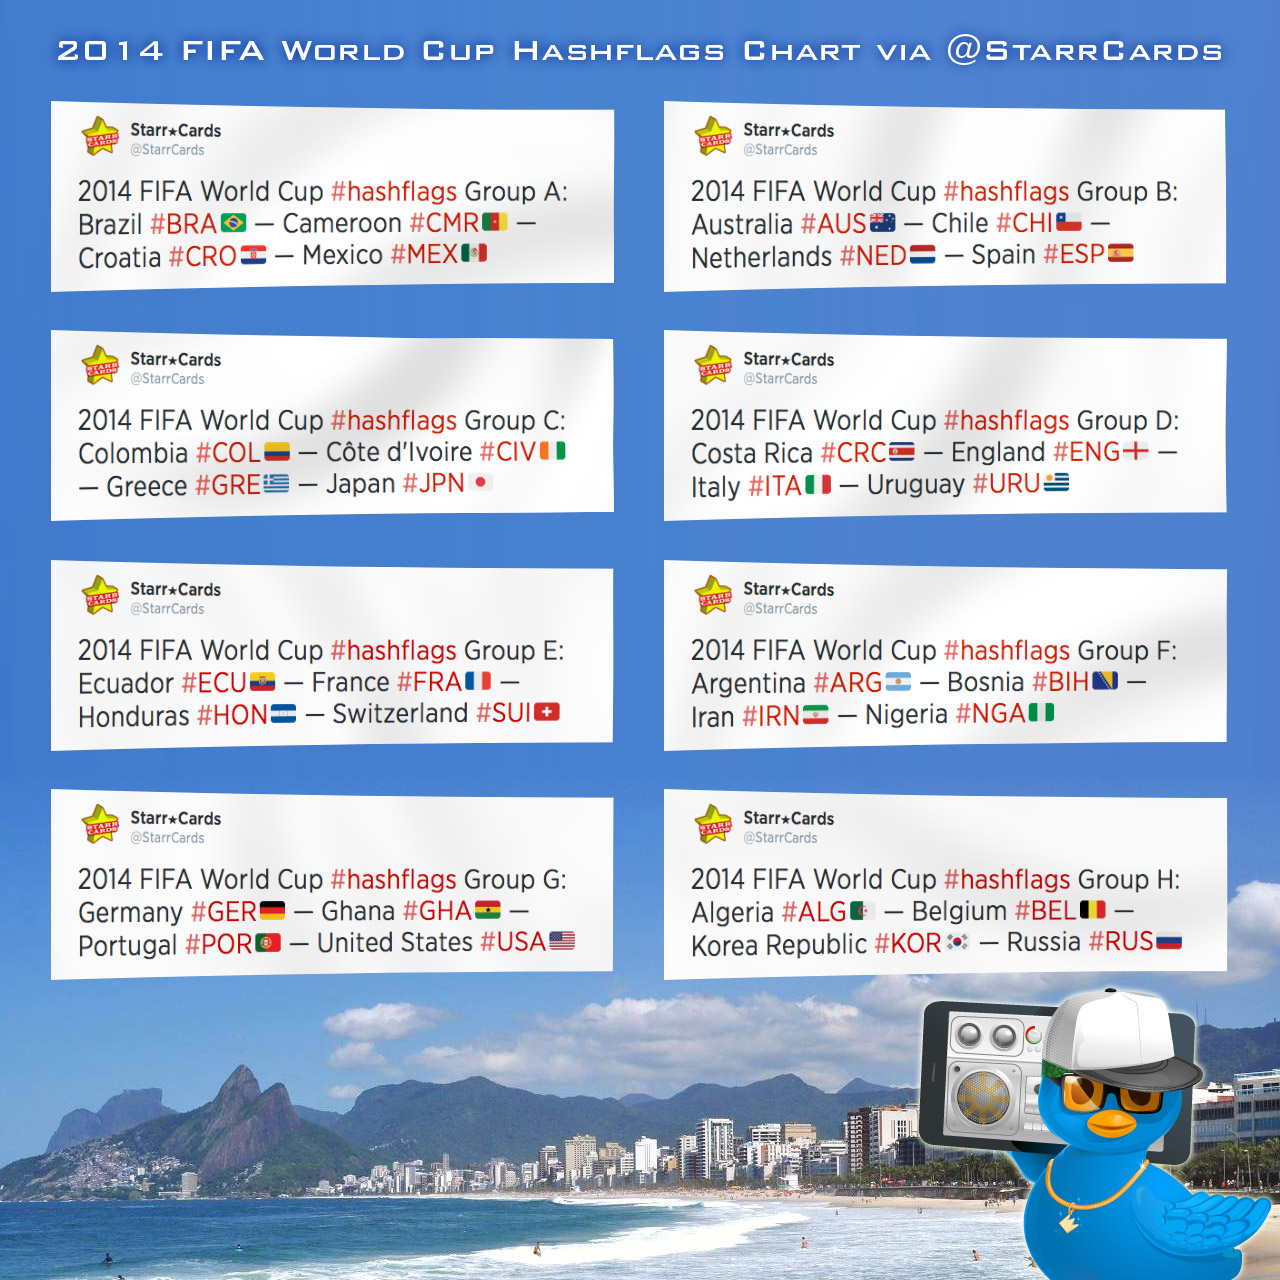 2014 FIFA World Cup hashflags chart from Starr Cards